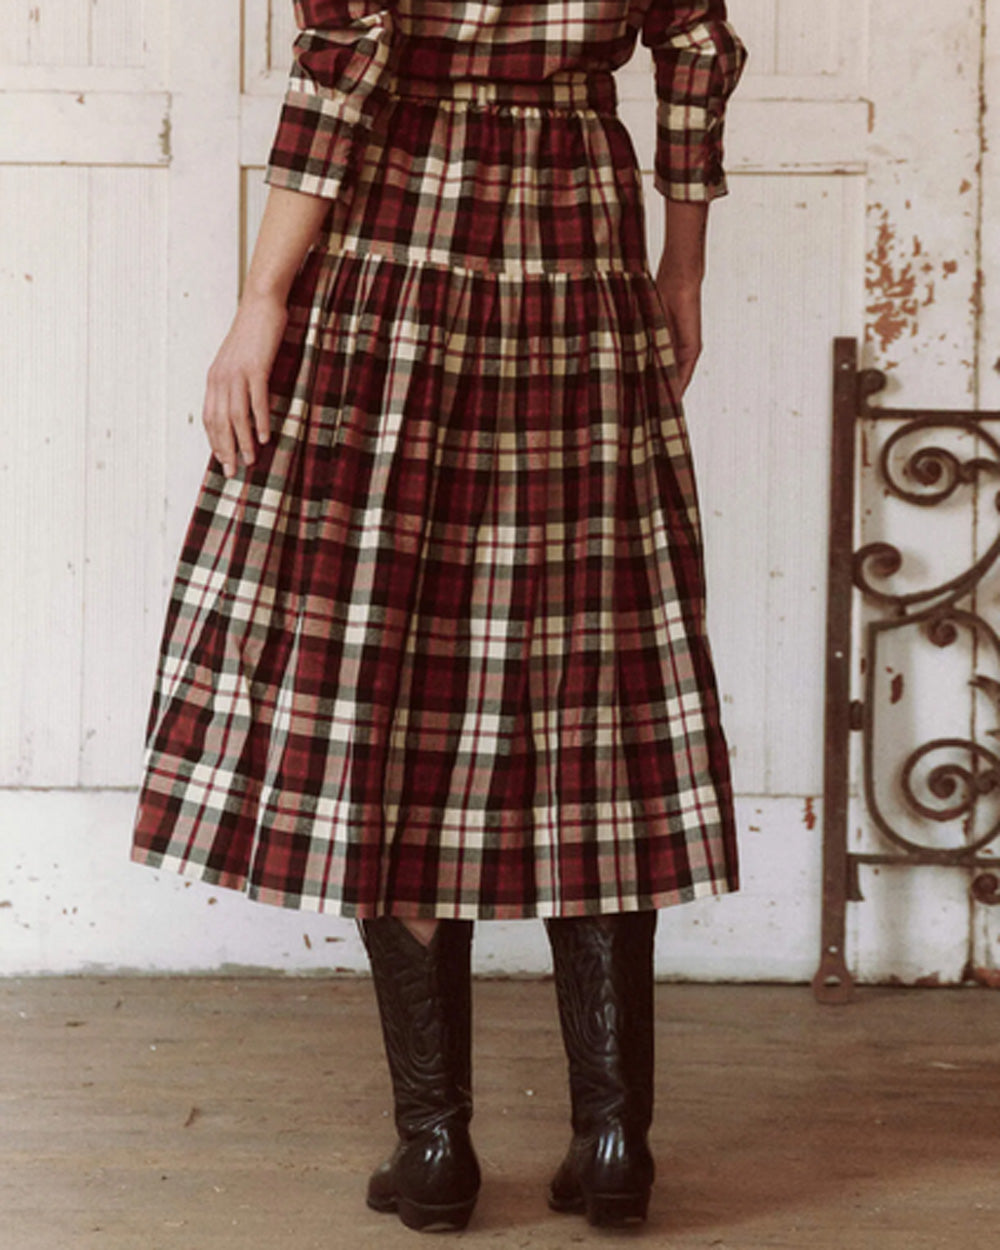 The Highland Skirt in Mill Plaid